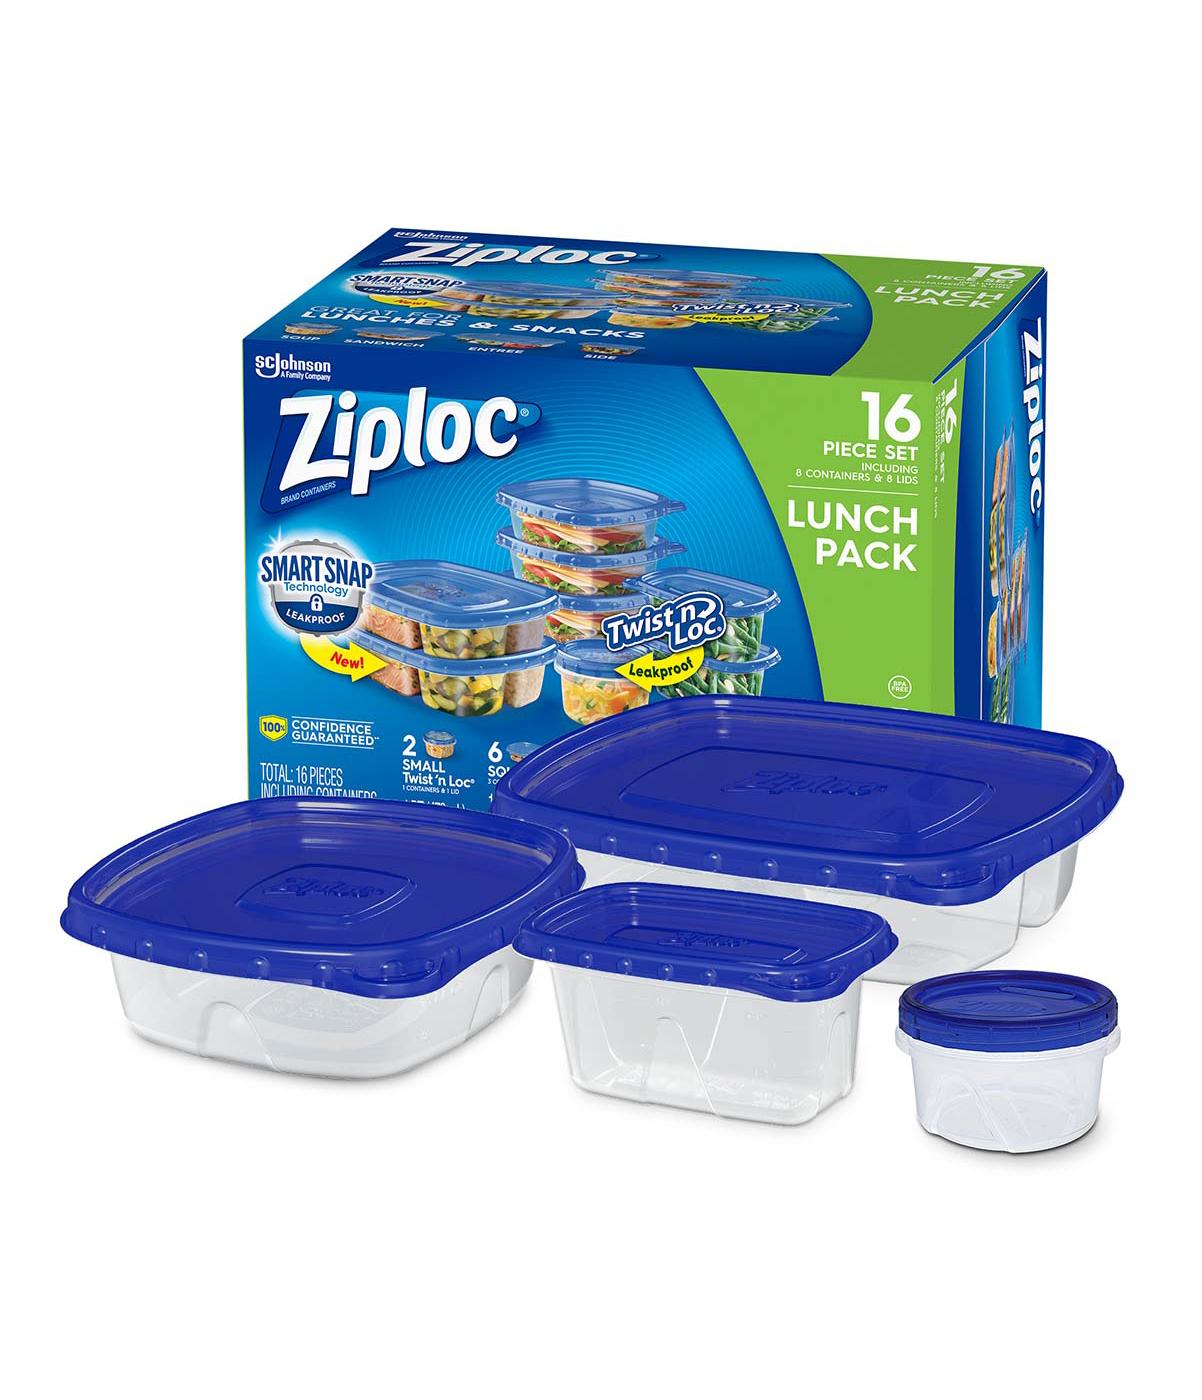 Ziploc Twist 'N Loc Lunch Pack Set 16 Pc Box, Food Storage Containers